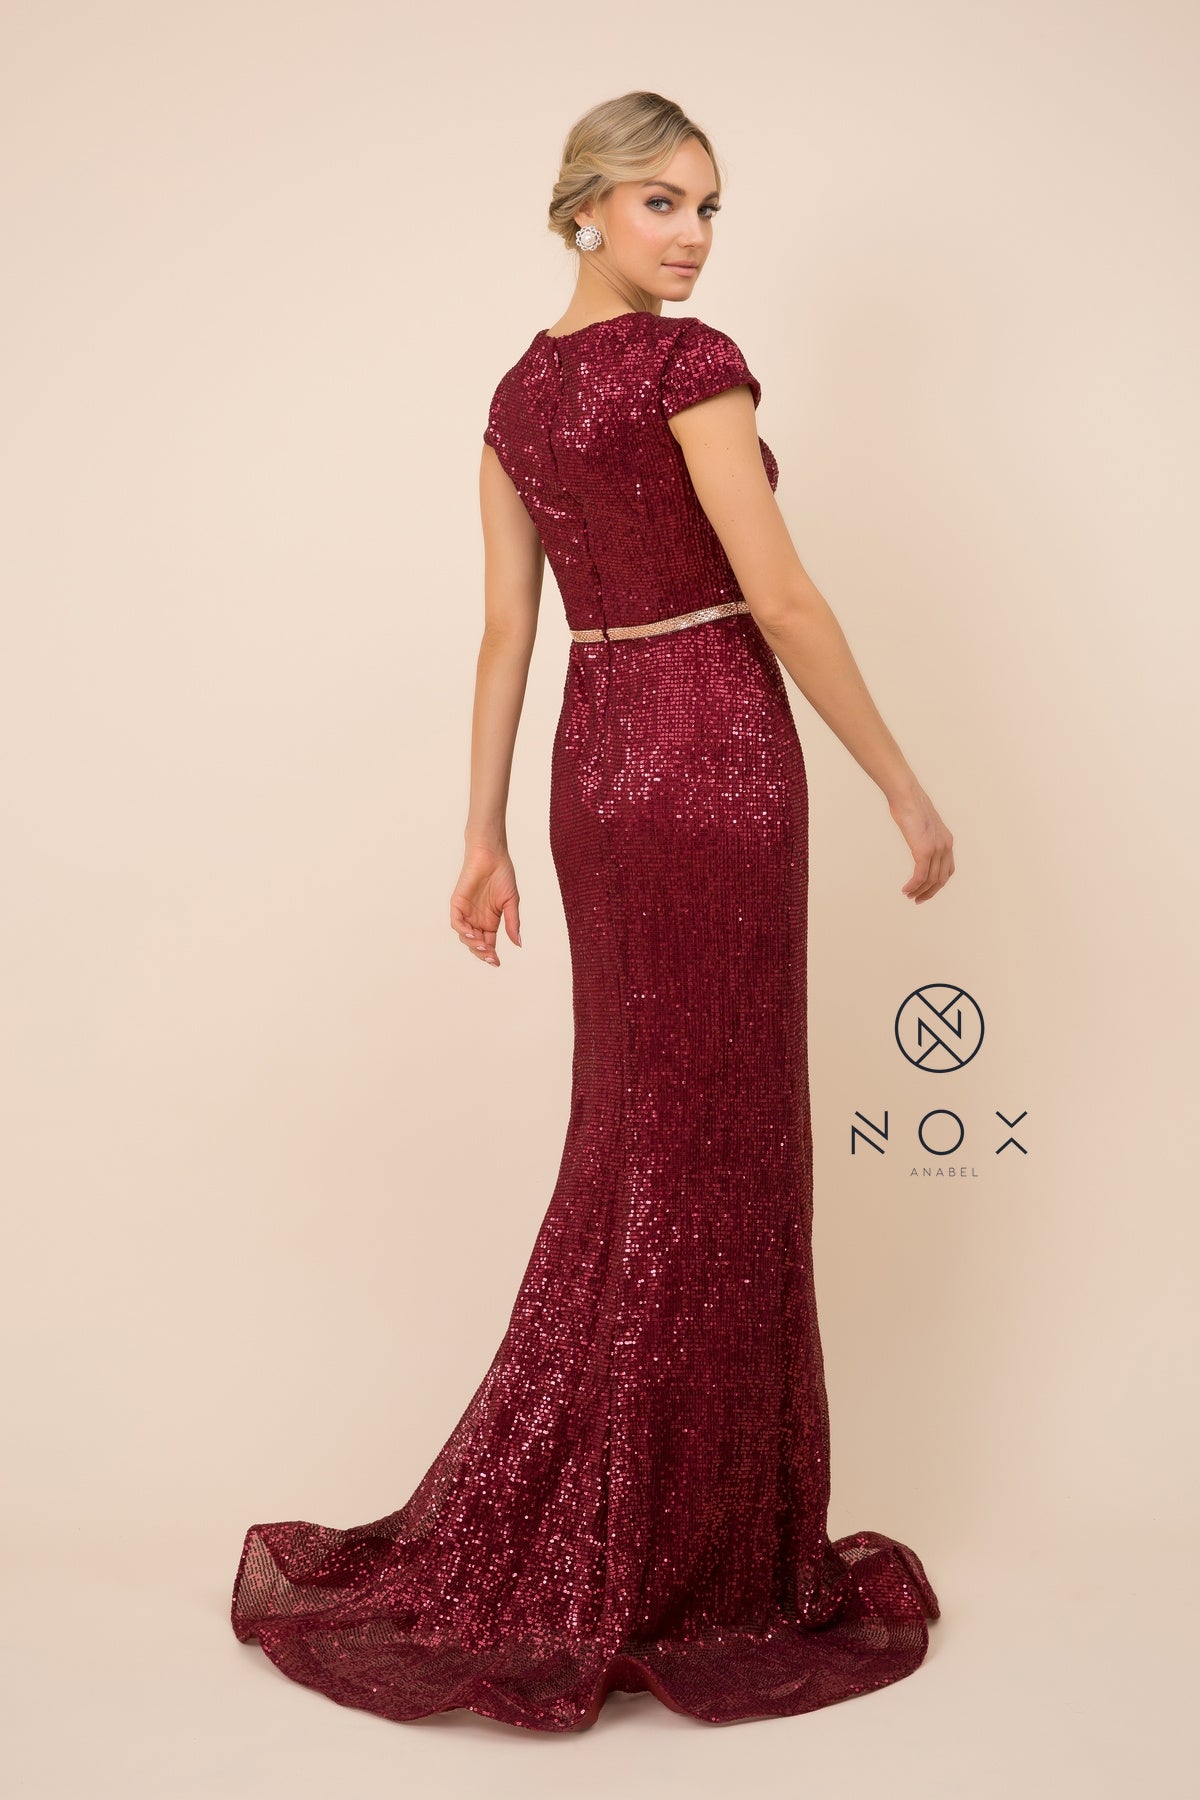 MyFashion.com - SHORT-SLEEVED MERMAID GOWN WITH ENCLOSED BACK (F338) - Nox Anabel promdress eveningdress fashion partydress weddingdress 
 gown homecoming promgown weddinggown 